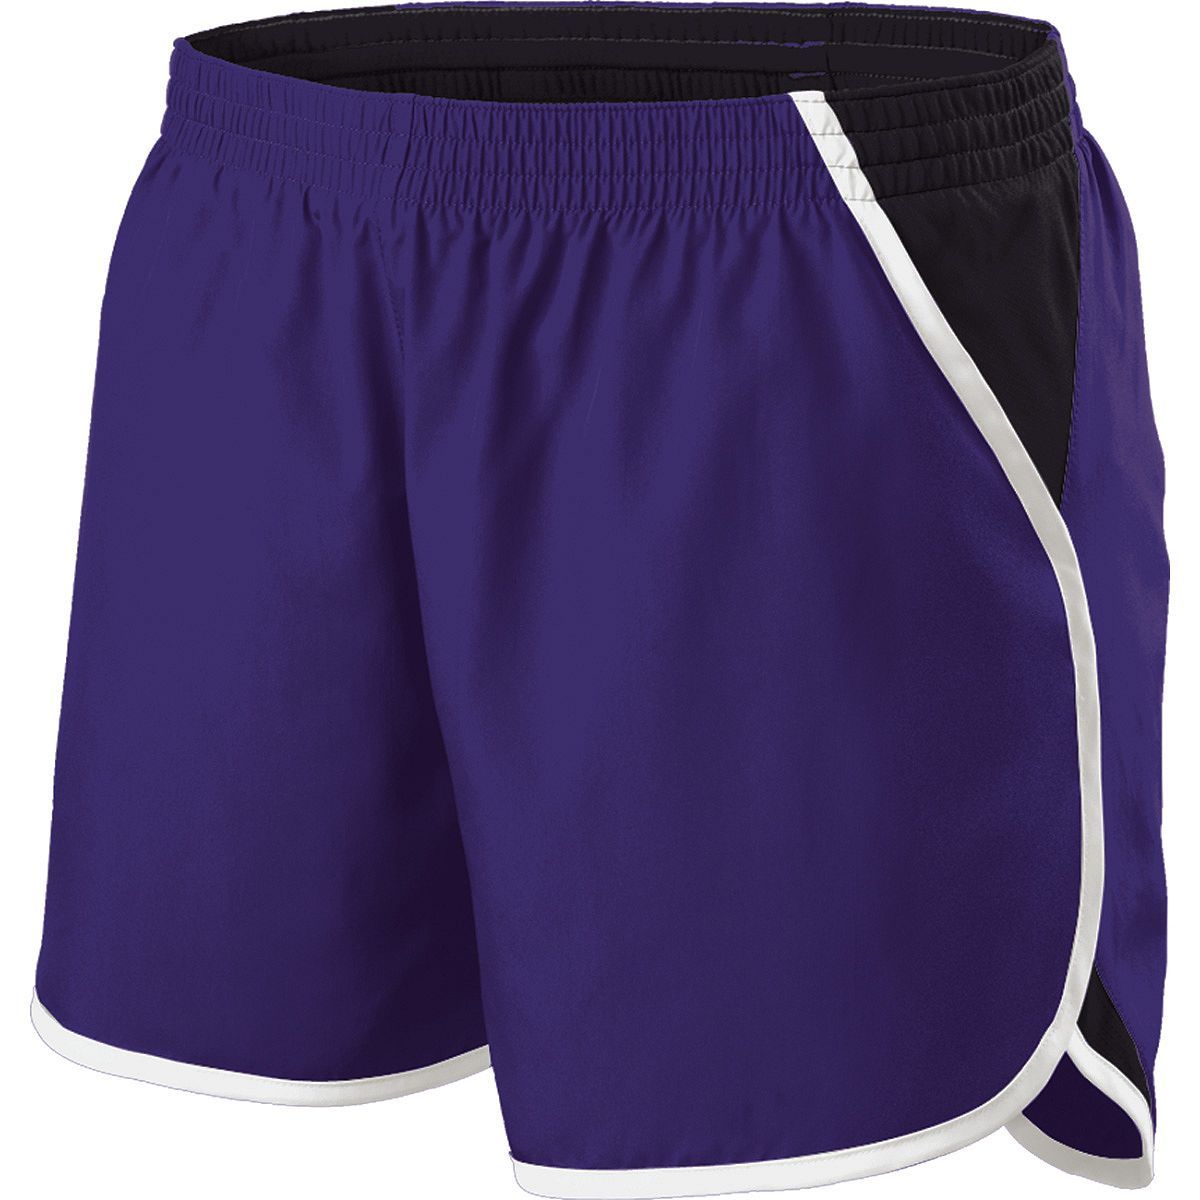 Holloway Girls Energize Shorts in Purple/Black/White  -Part of the Girls, Holloway, Girls-Shorts product lines at KanaleyCreations.com